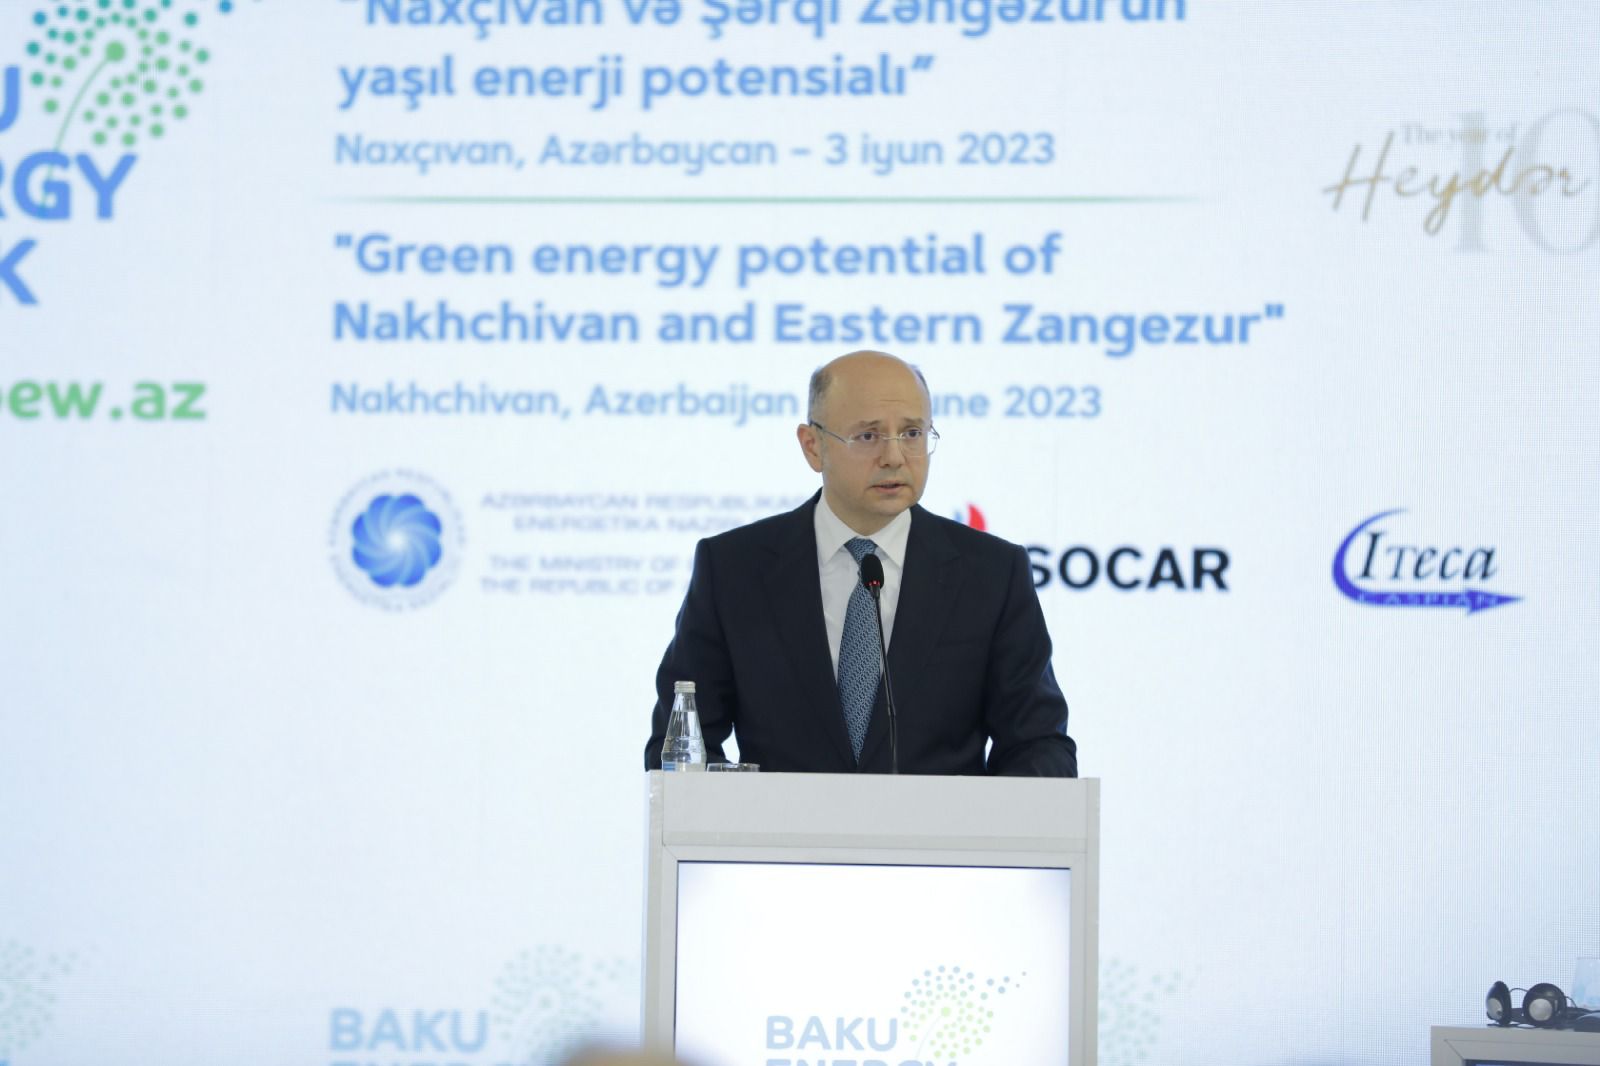 Ministry of Energy signed Memoranda of Understanding with foreign companies on green energy projects with capacity of 900MW in Nakhchivan